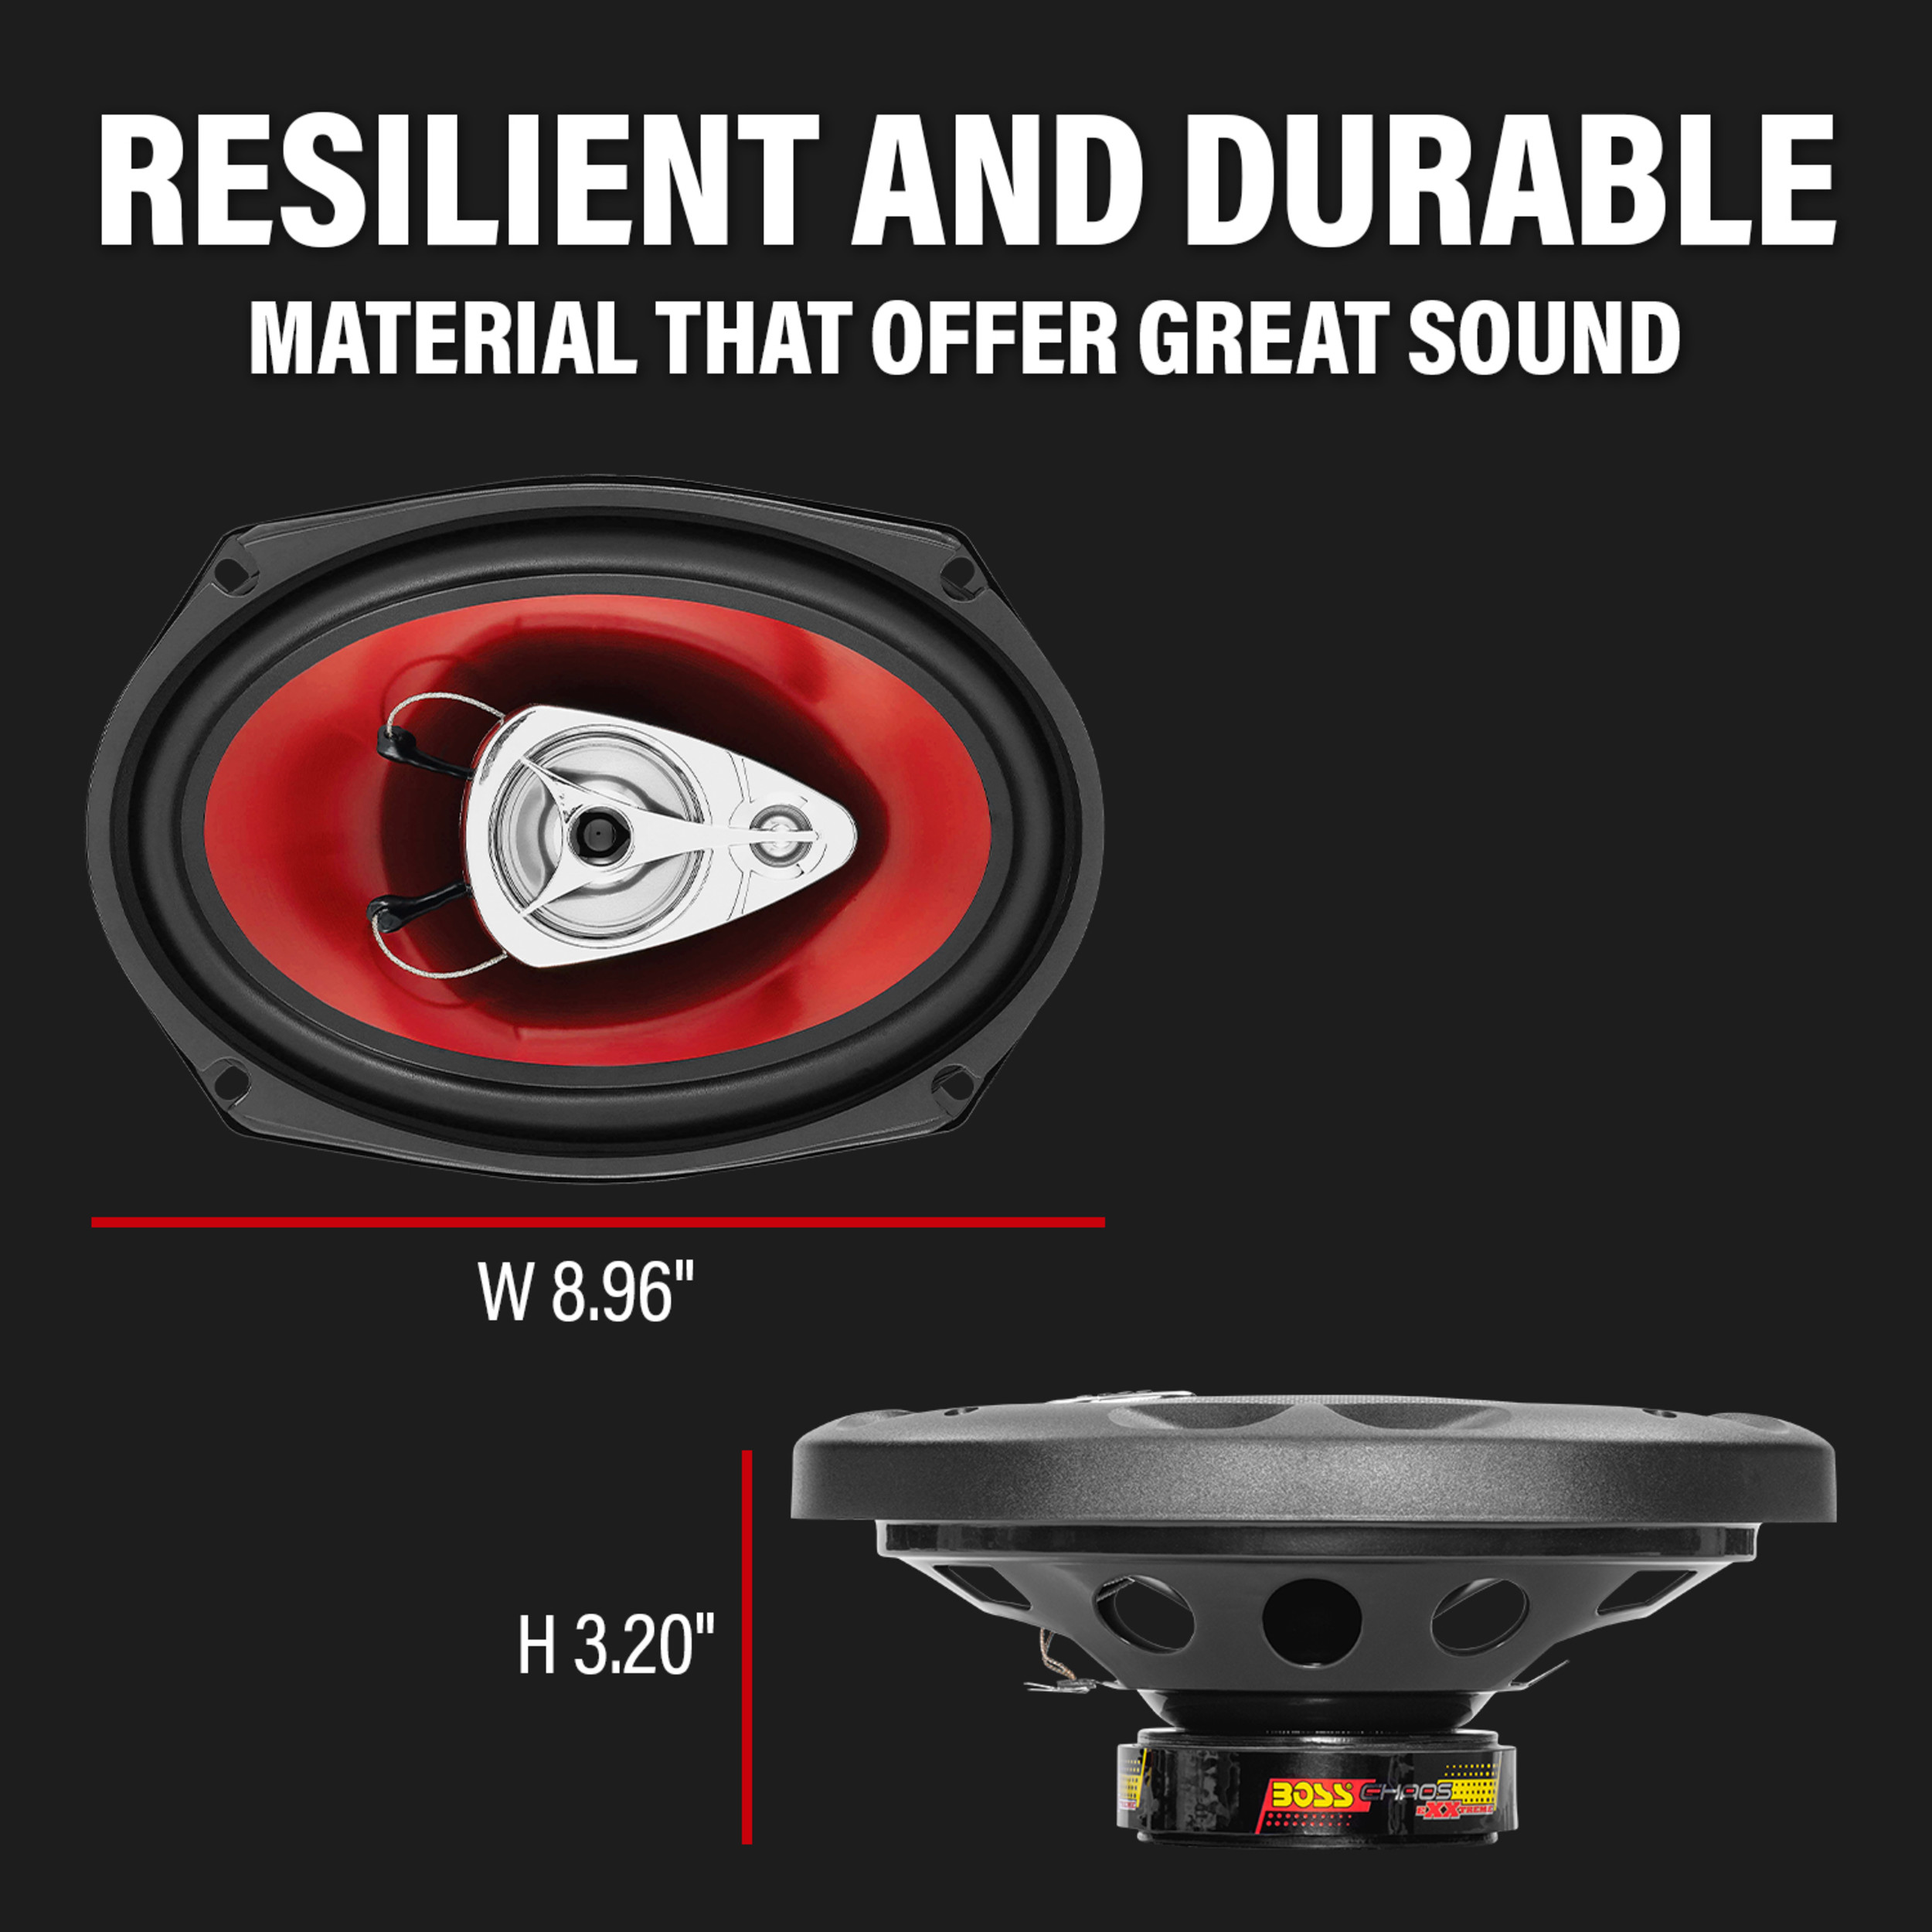 BOSS Audio Systems CH6930 Chaos Series 6 x 9 inch Car Stereo Door Speakers - 400 Watts Max, 3 Way, Full Range Audio, Tweeters, Coaxial, Sold in Pairs - image 4 of 12